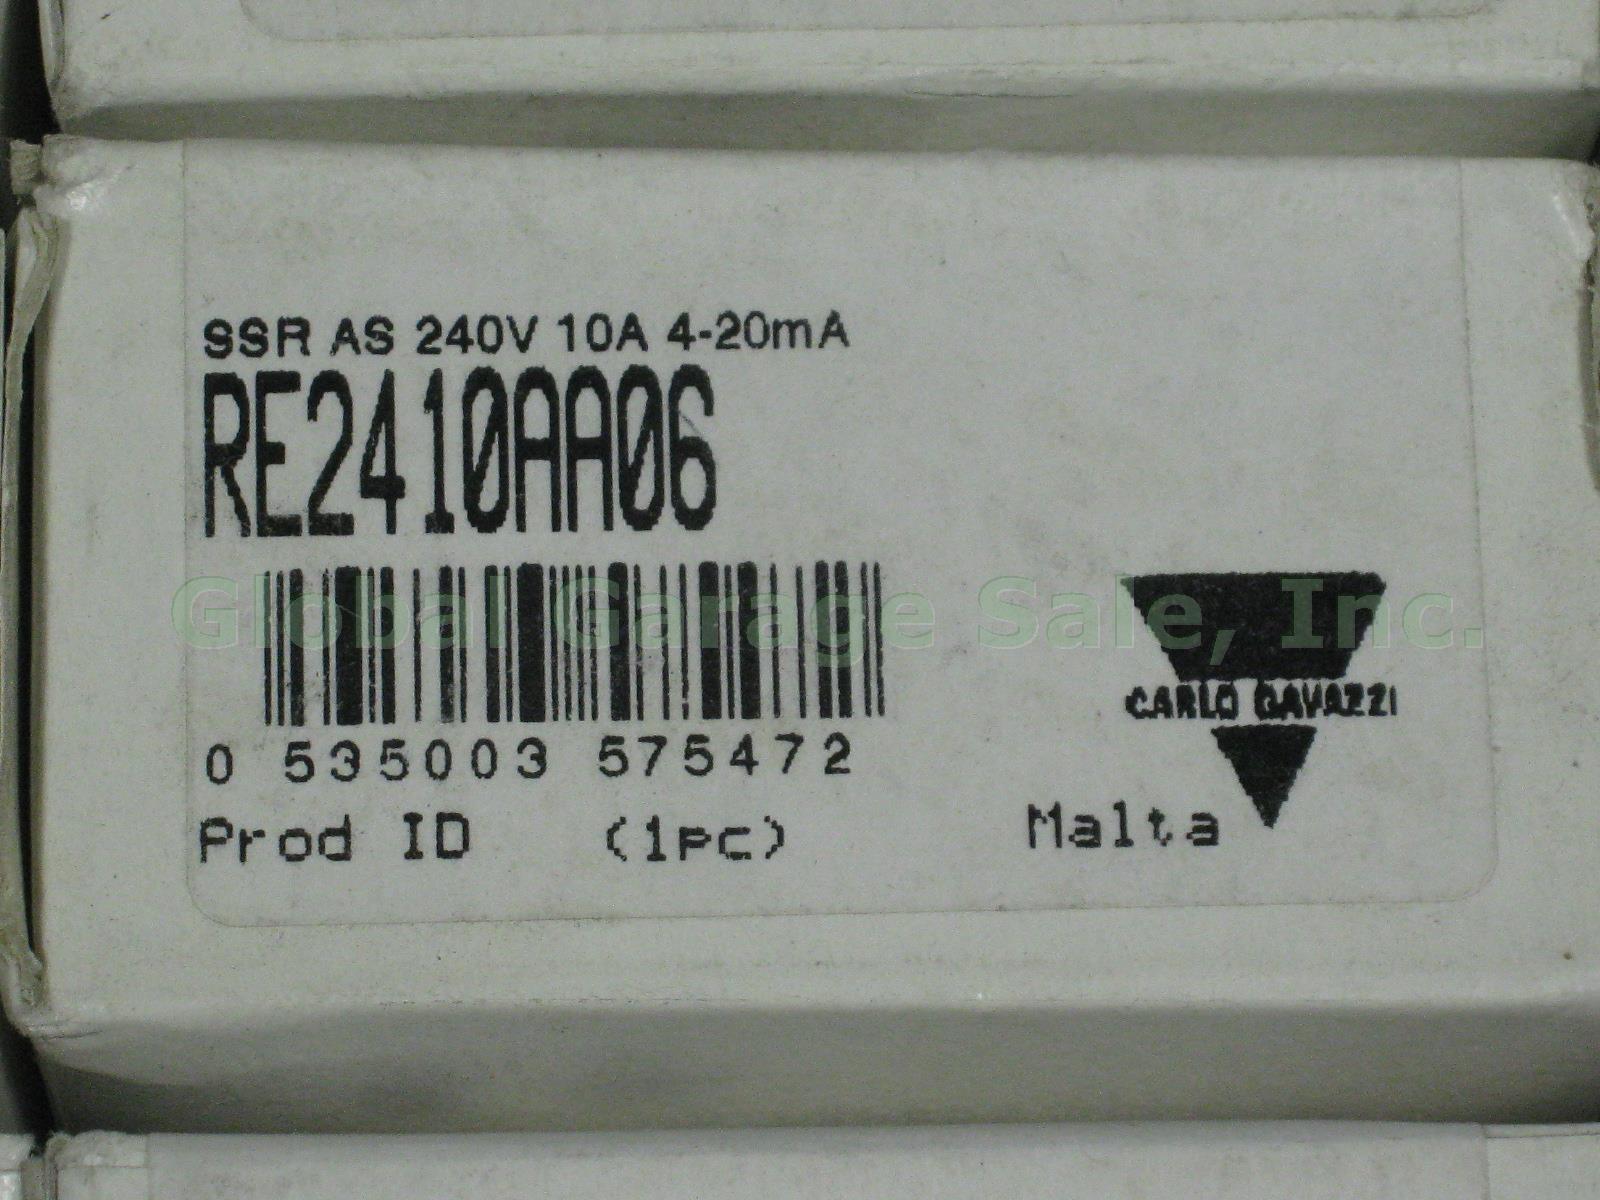 15 NOS Carlo Gavazzi RE2410AA06 Solid State Relays Lot SSR AS 240V 10A 4-20mA NR 1